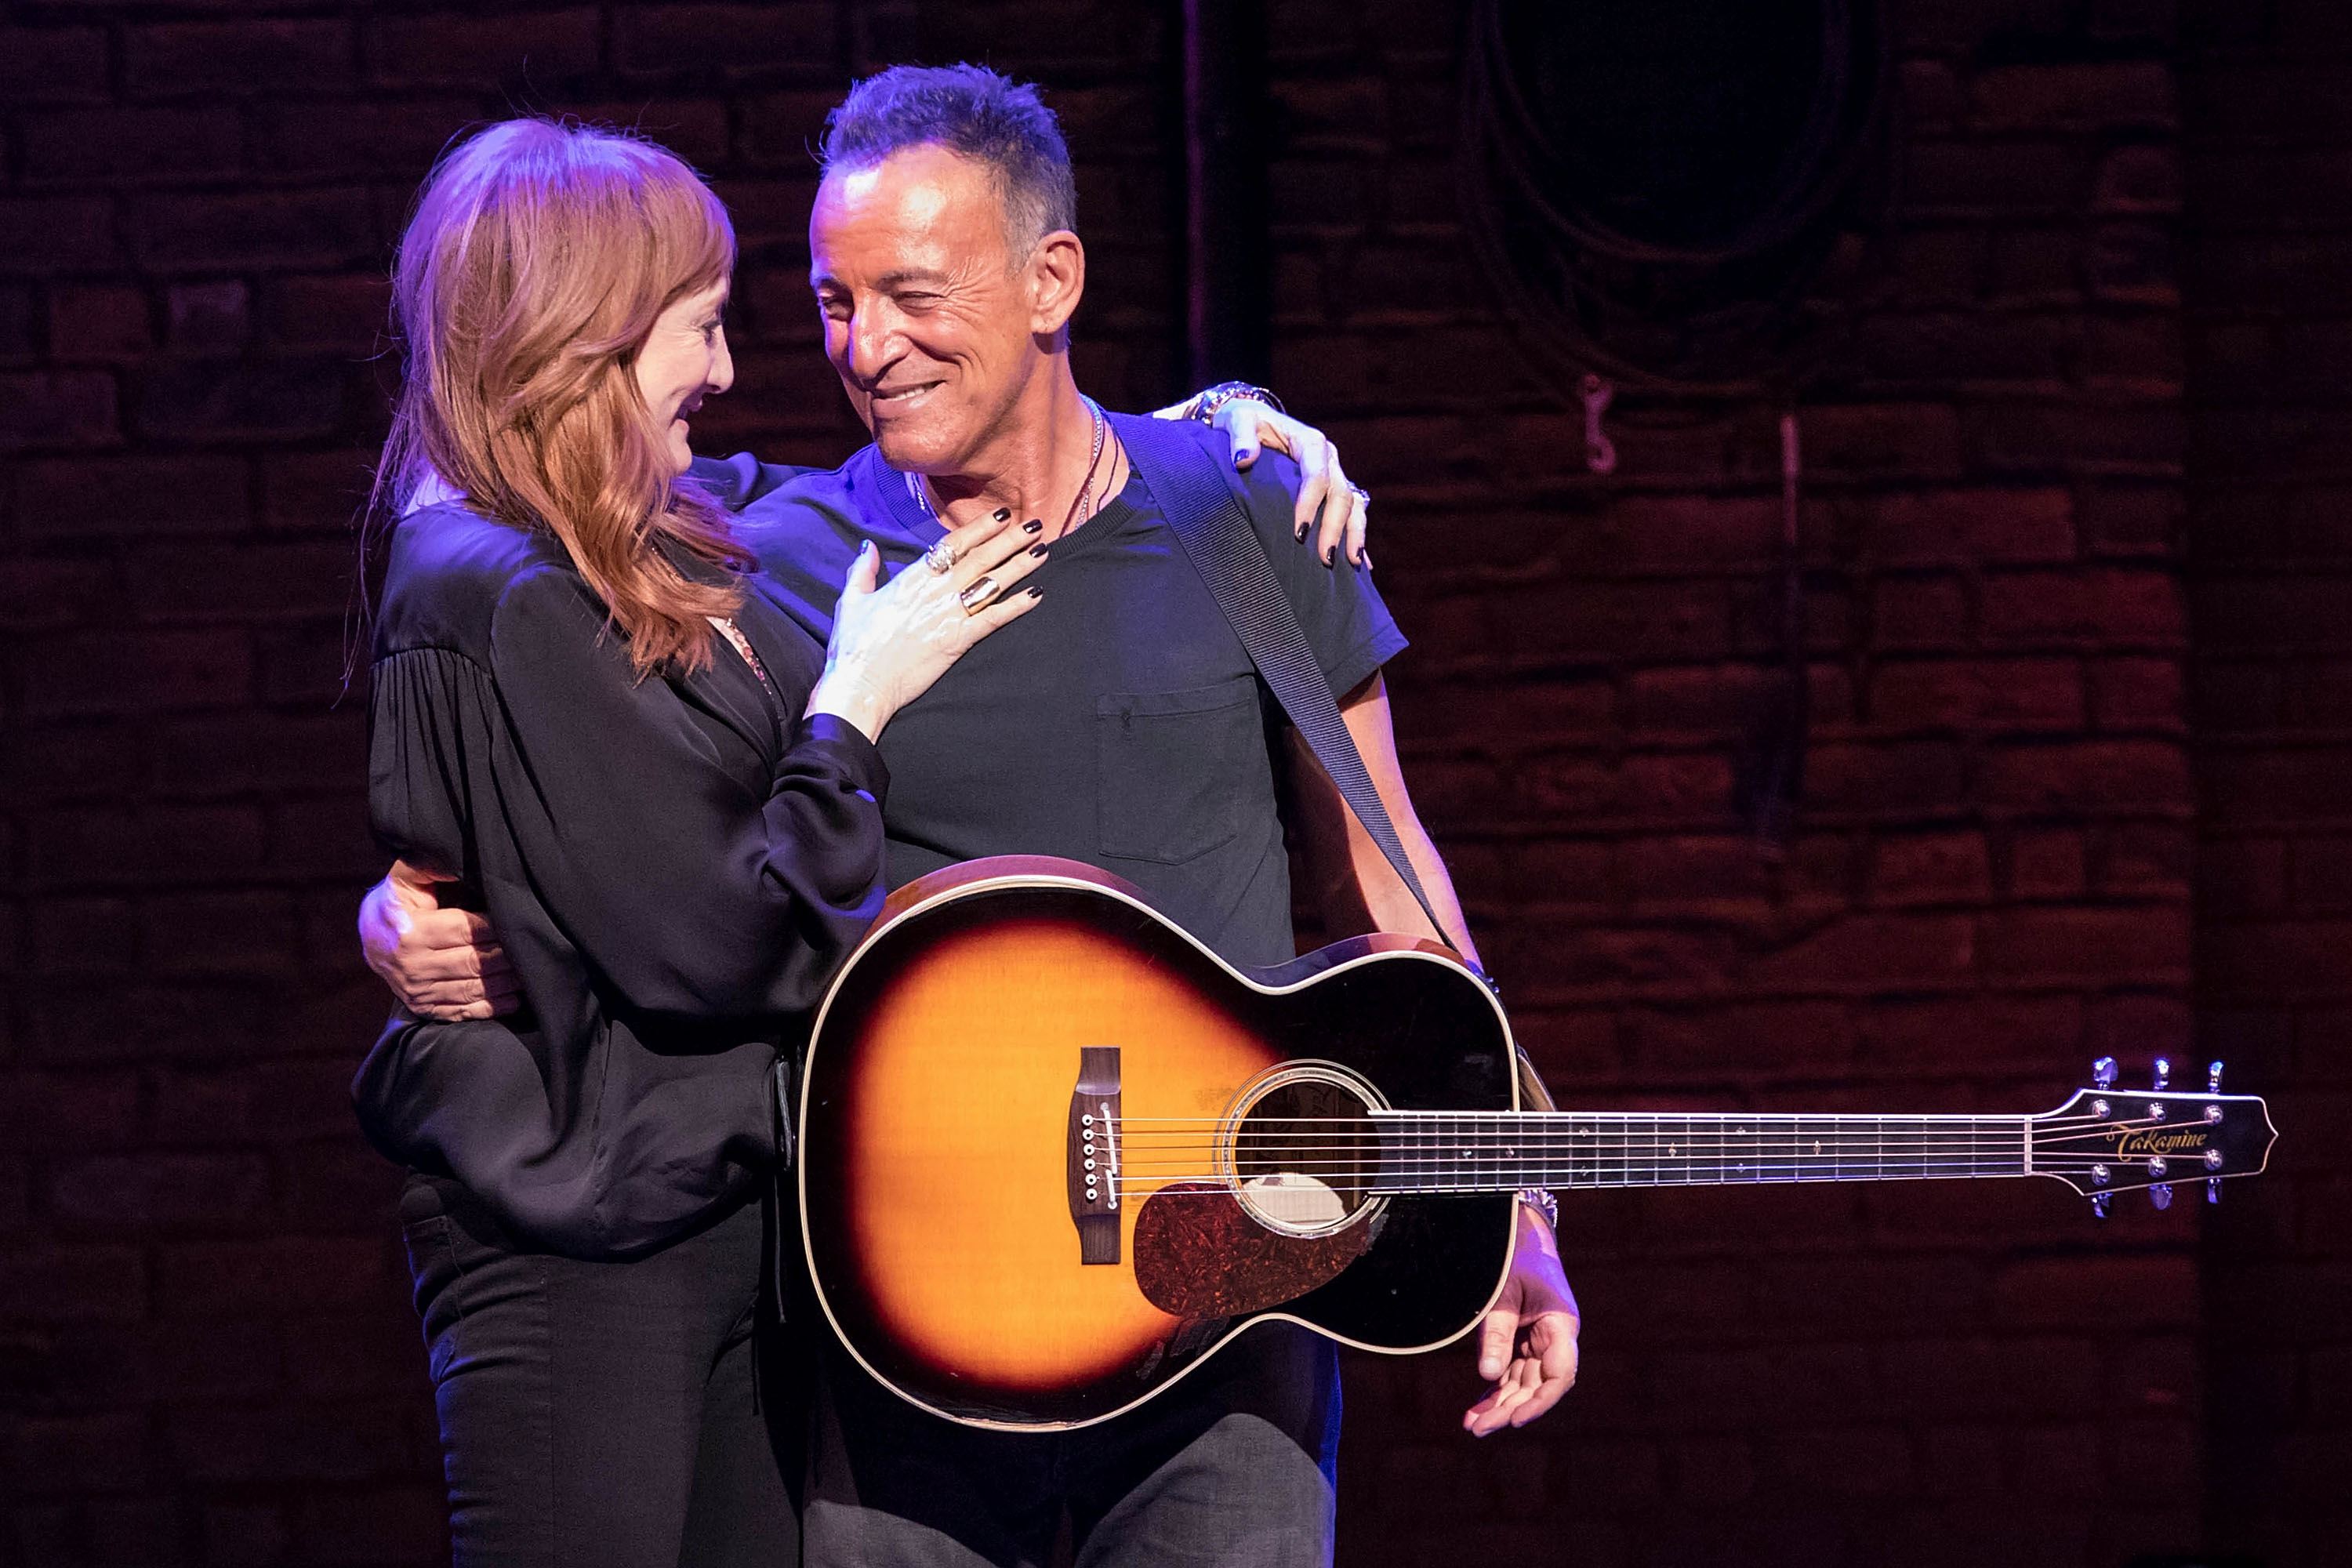 Patti Scialfa and Bruce Springsteen in New York City on December 15, 2018. | Source: Getty Images